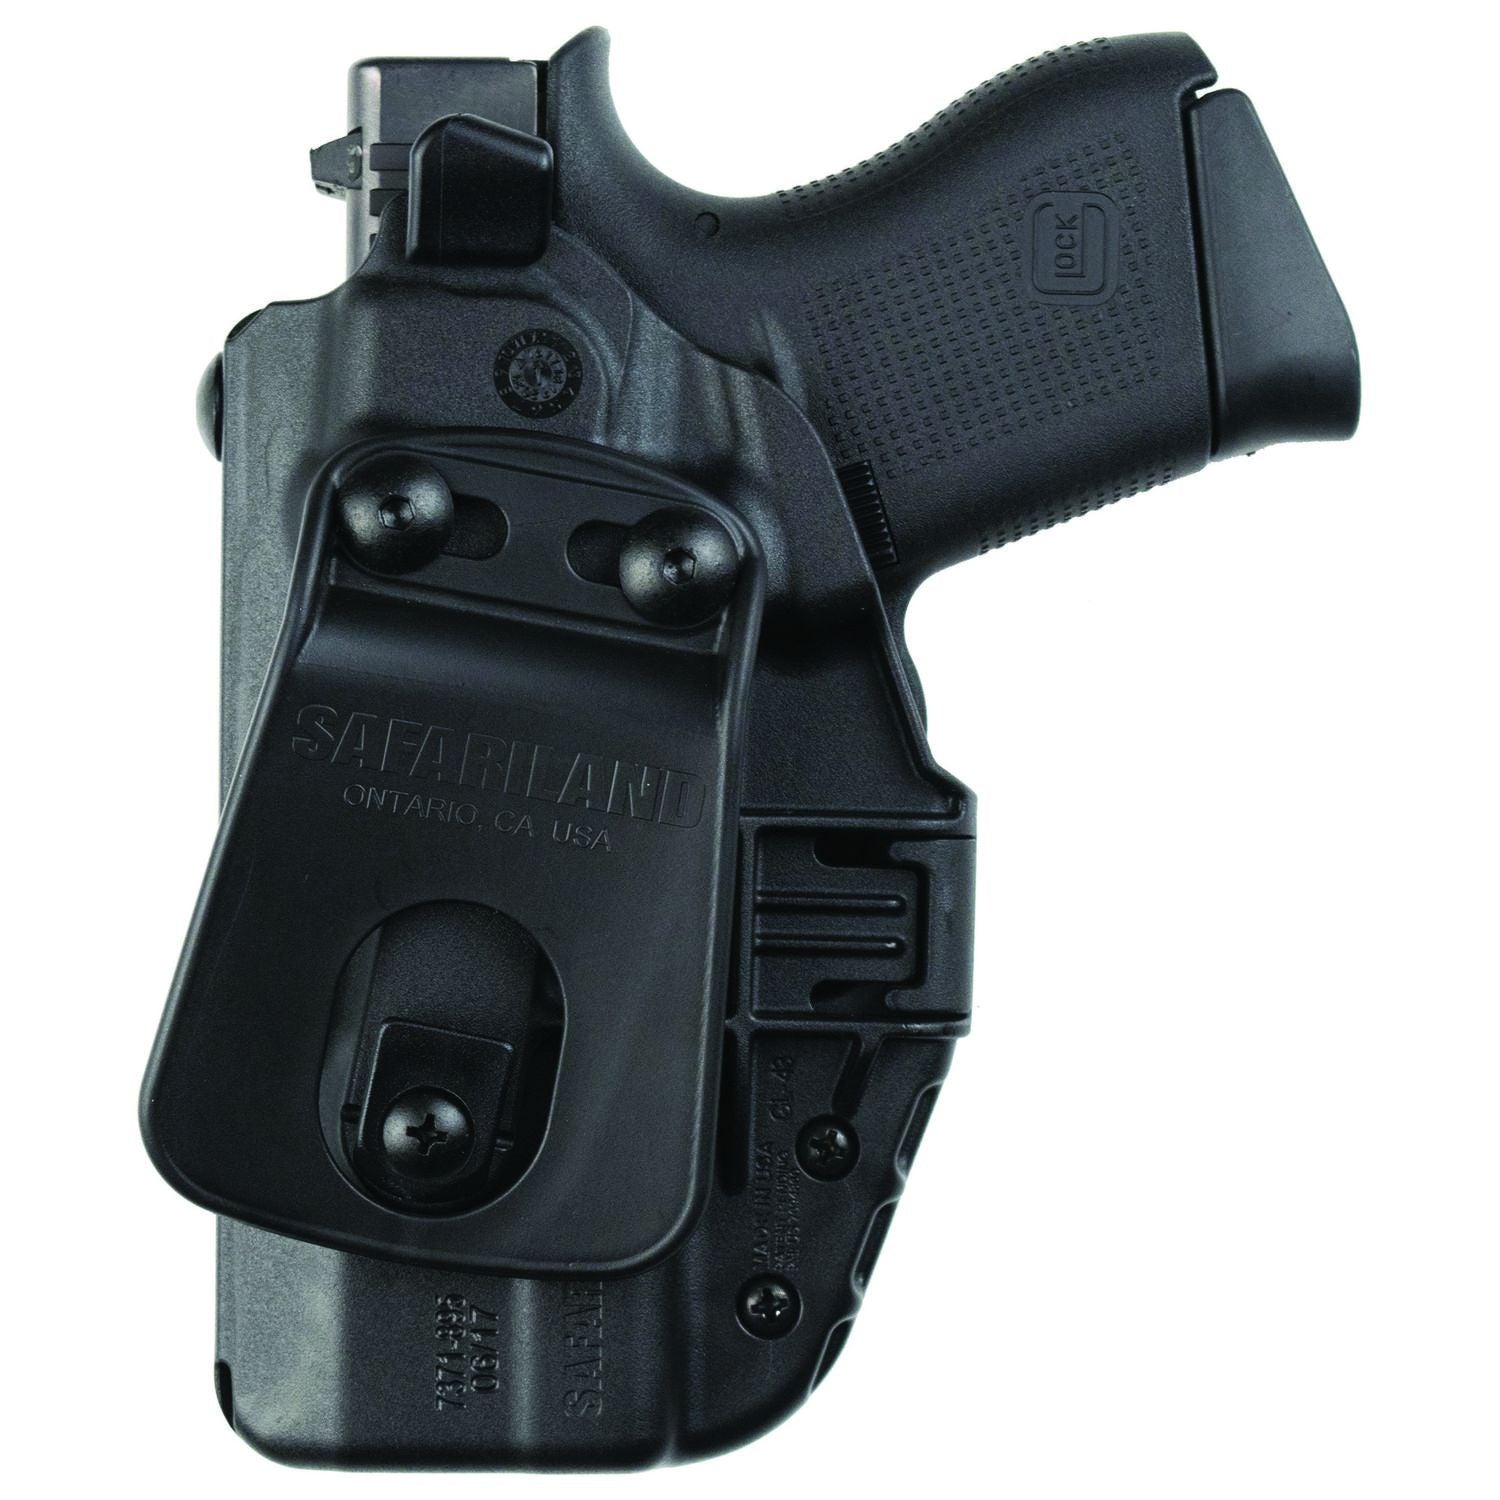 Safariland Model-7371 7TS ALS Open-Top Concealment Paddle Holster with TLR6 Weapon Light Holsters Safariland Left Tactical Gear Supplier Tactical Distributors Australia